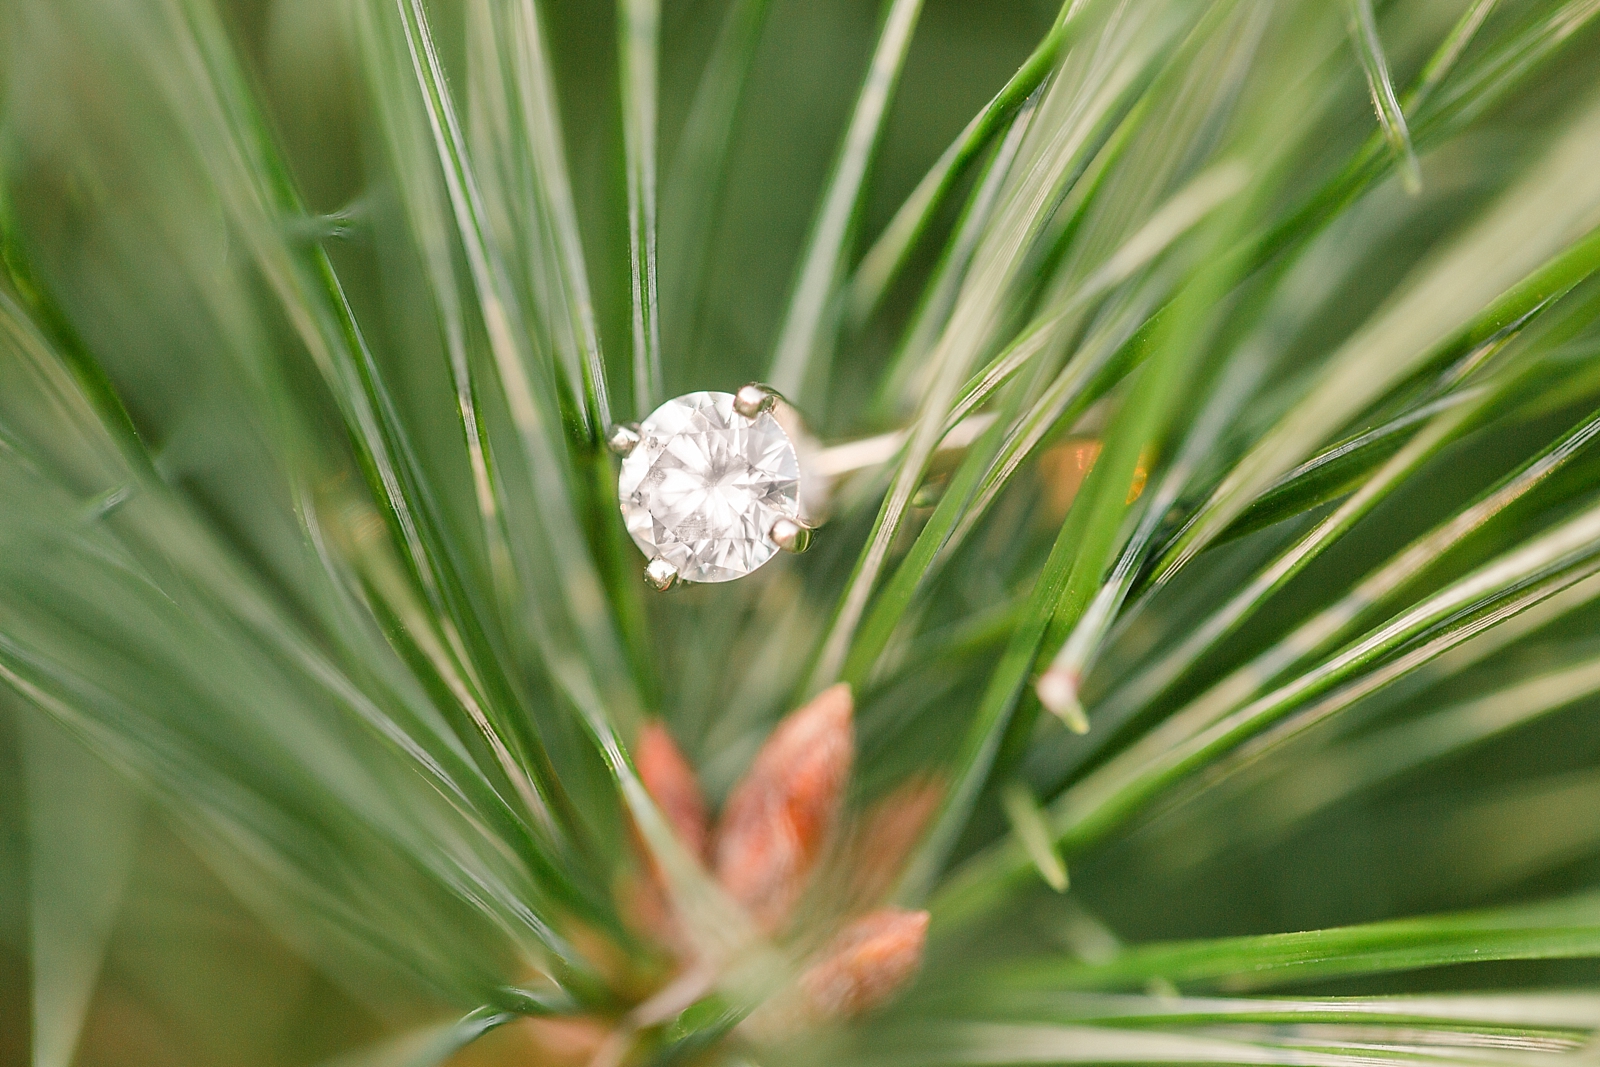 Charlotte Engagement Ring Detail in pine needles of a Christmas tree Photo